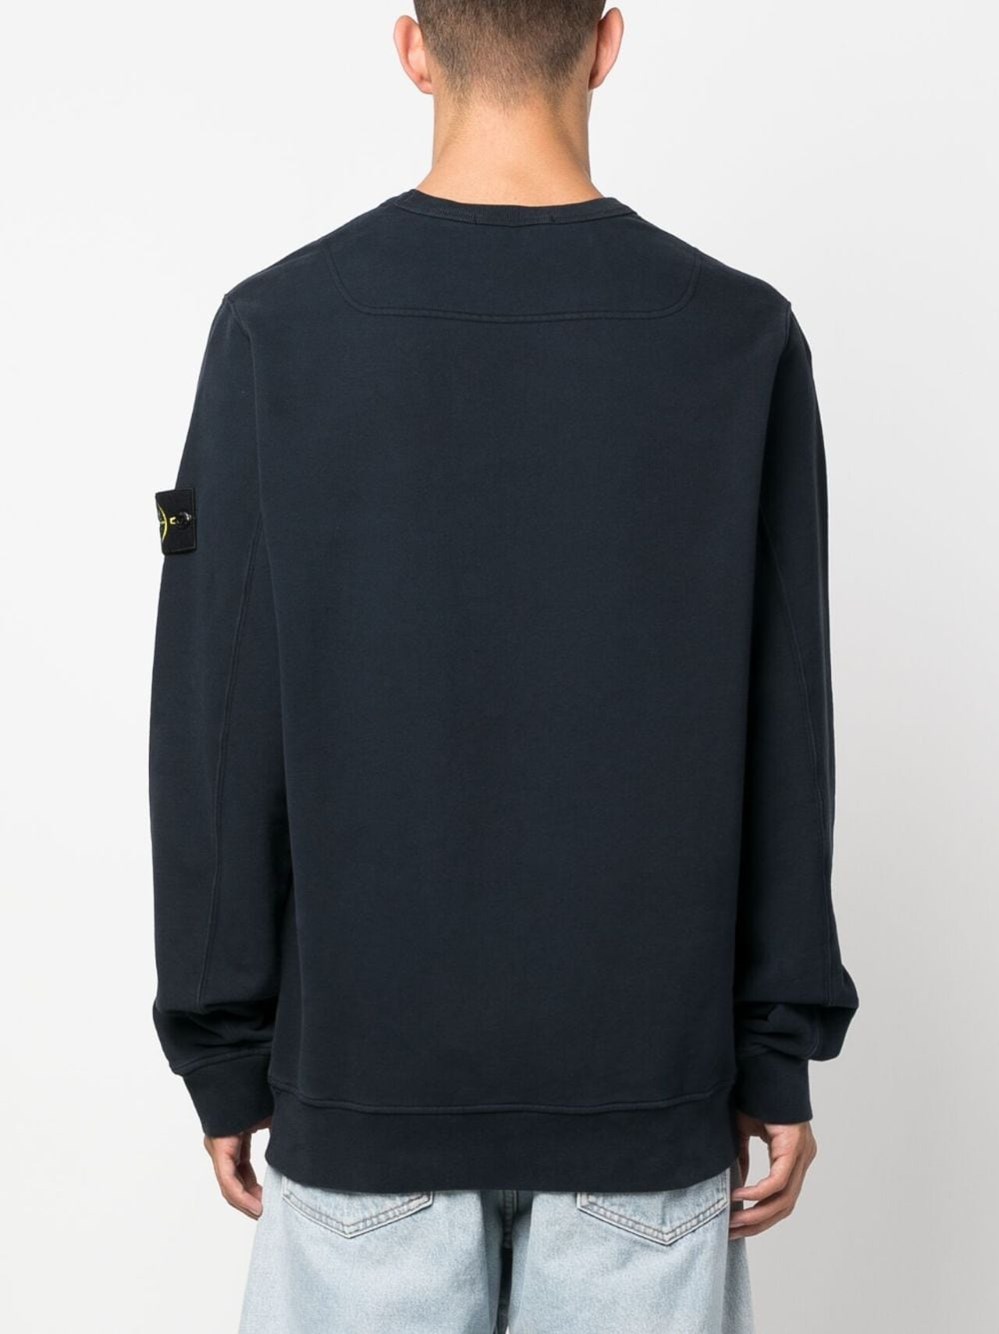 stone island 791562420 V0020 NAVY BLUE available on montiboutique.com ...